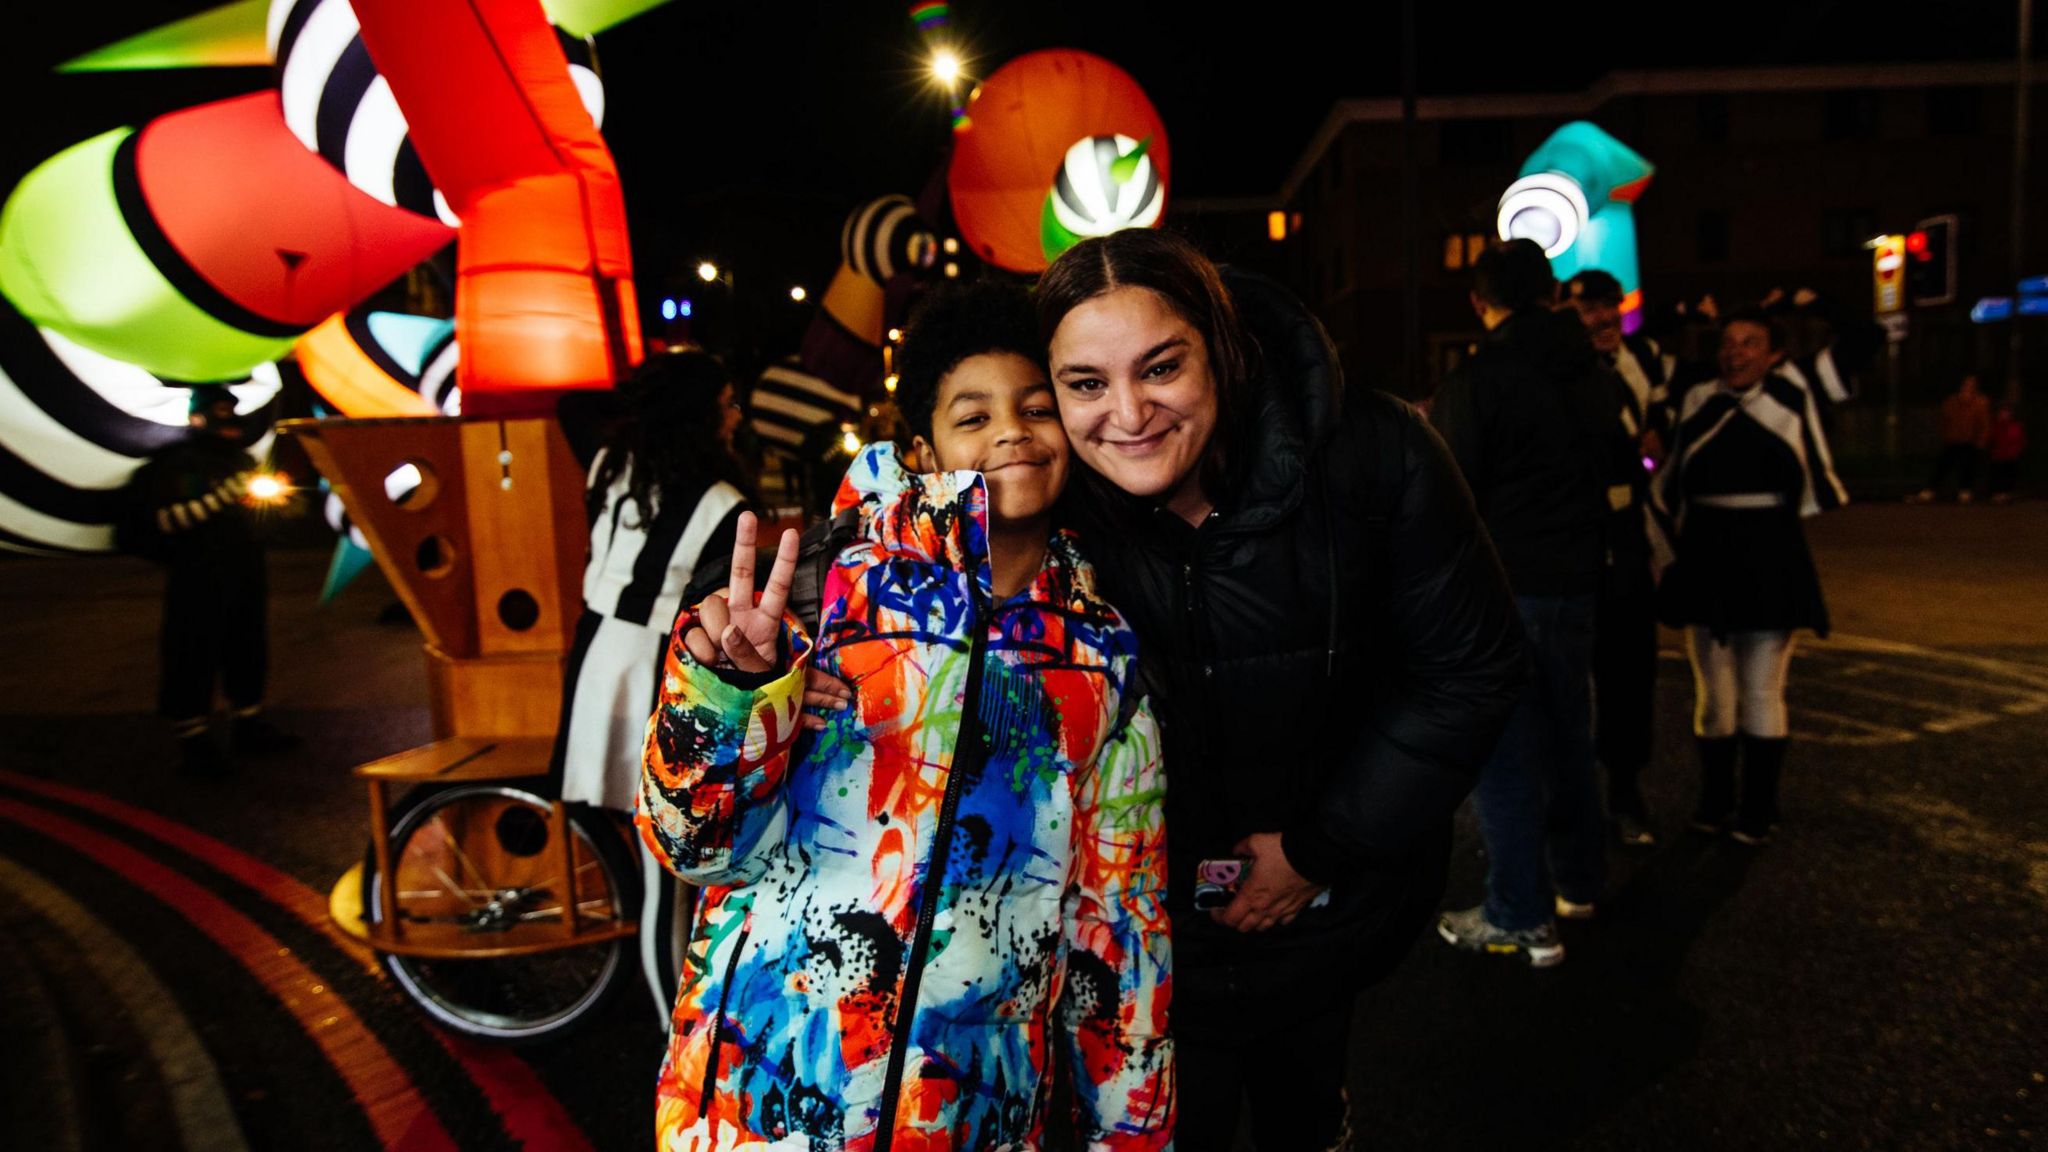 Woman and child at Lampadophores light show in Luton